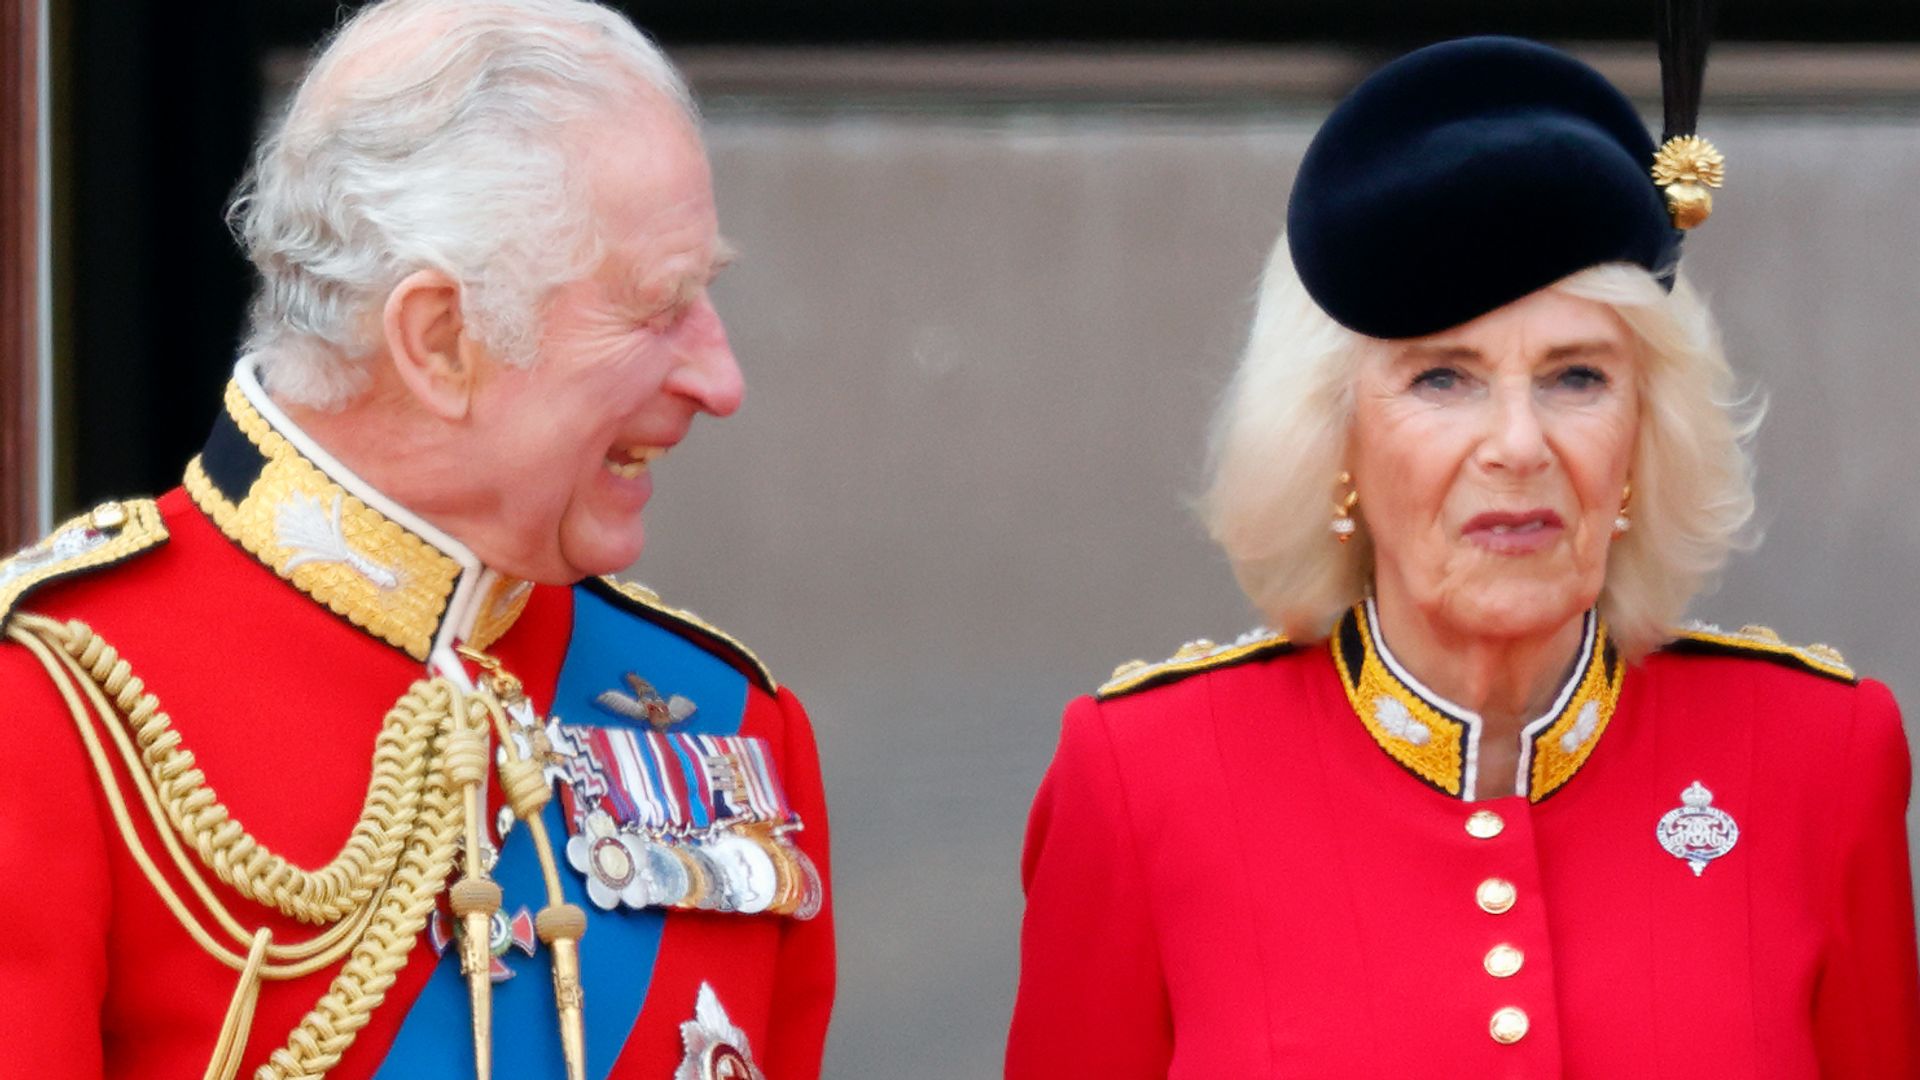 King Charles III and Queen Camilla wearing red outfits on the balcony at Buckingham Palace